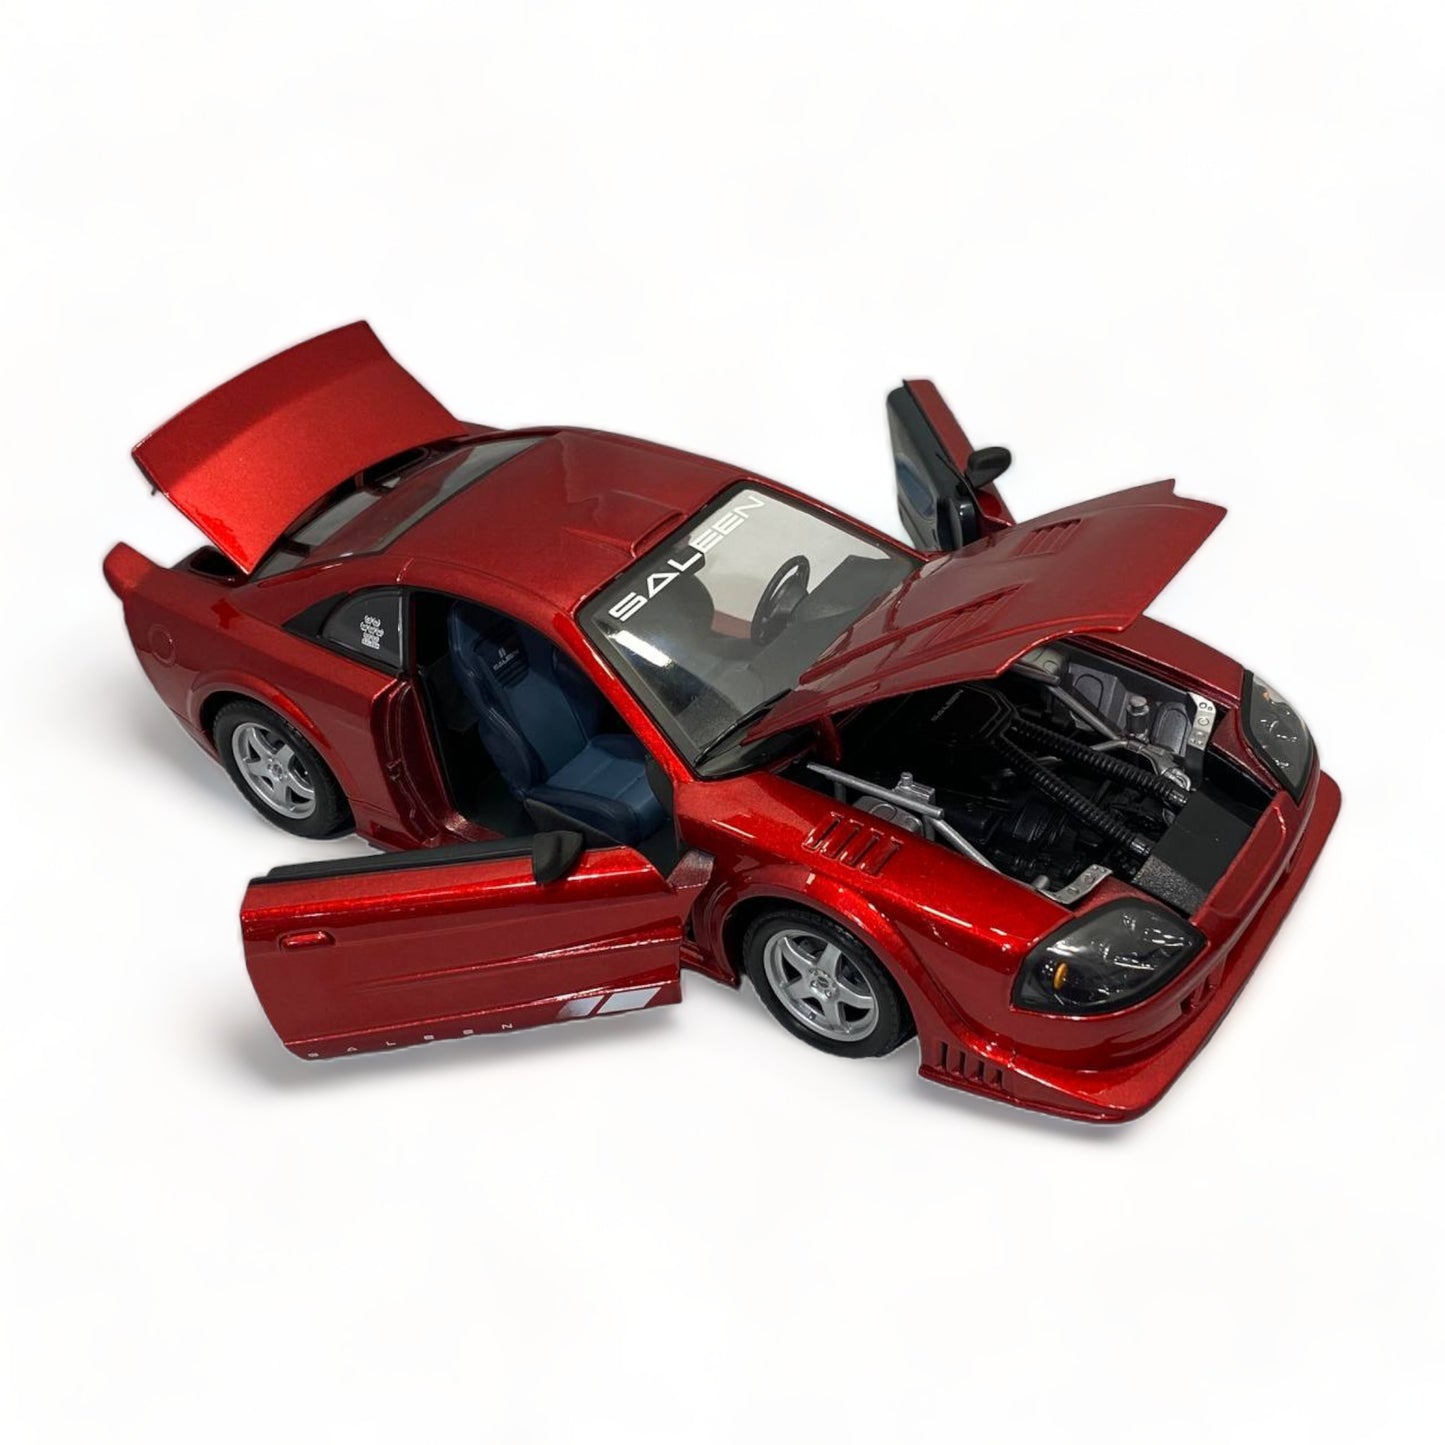 Motor Max Ford SALEEN SR RED 1/18